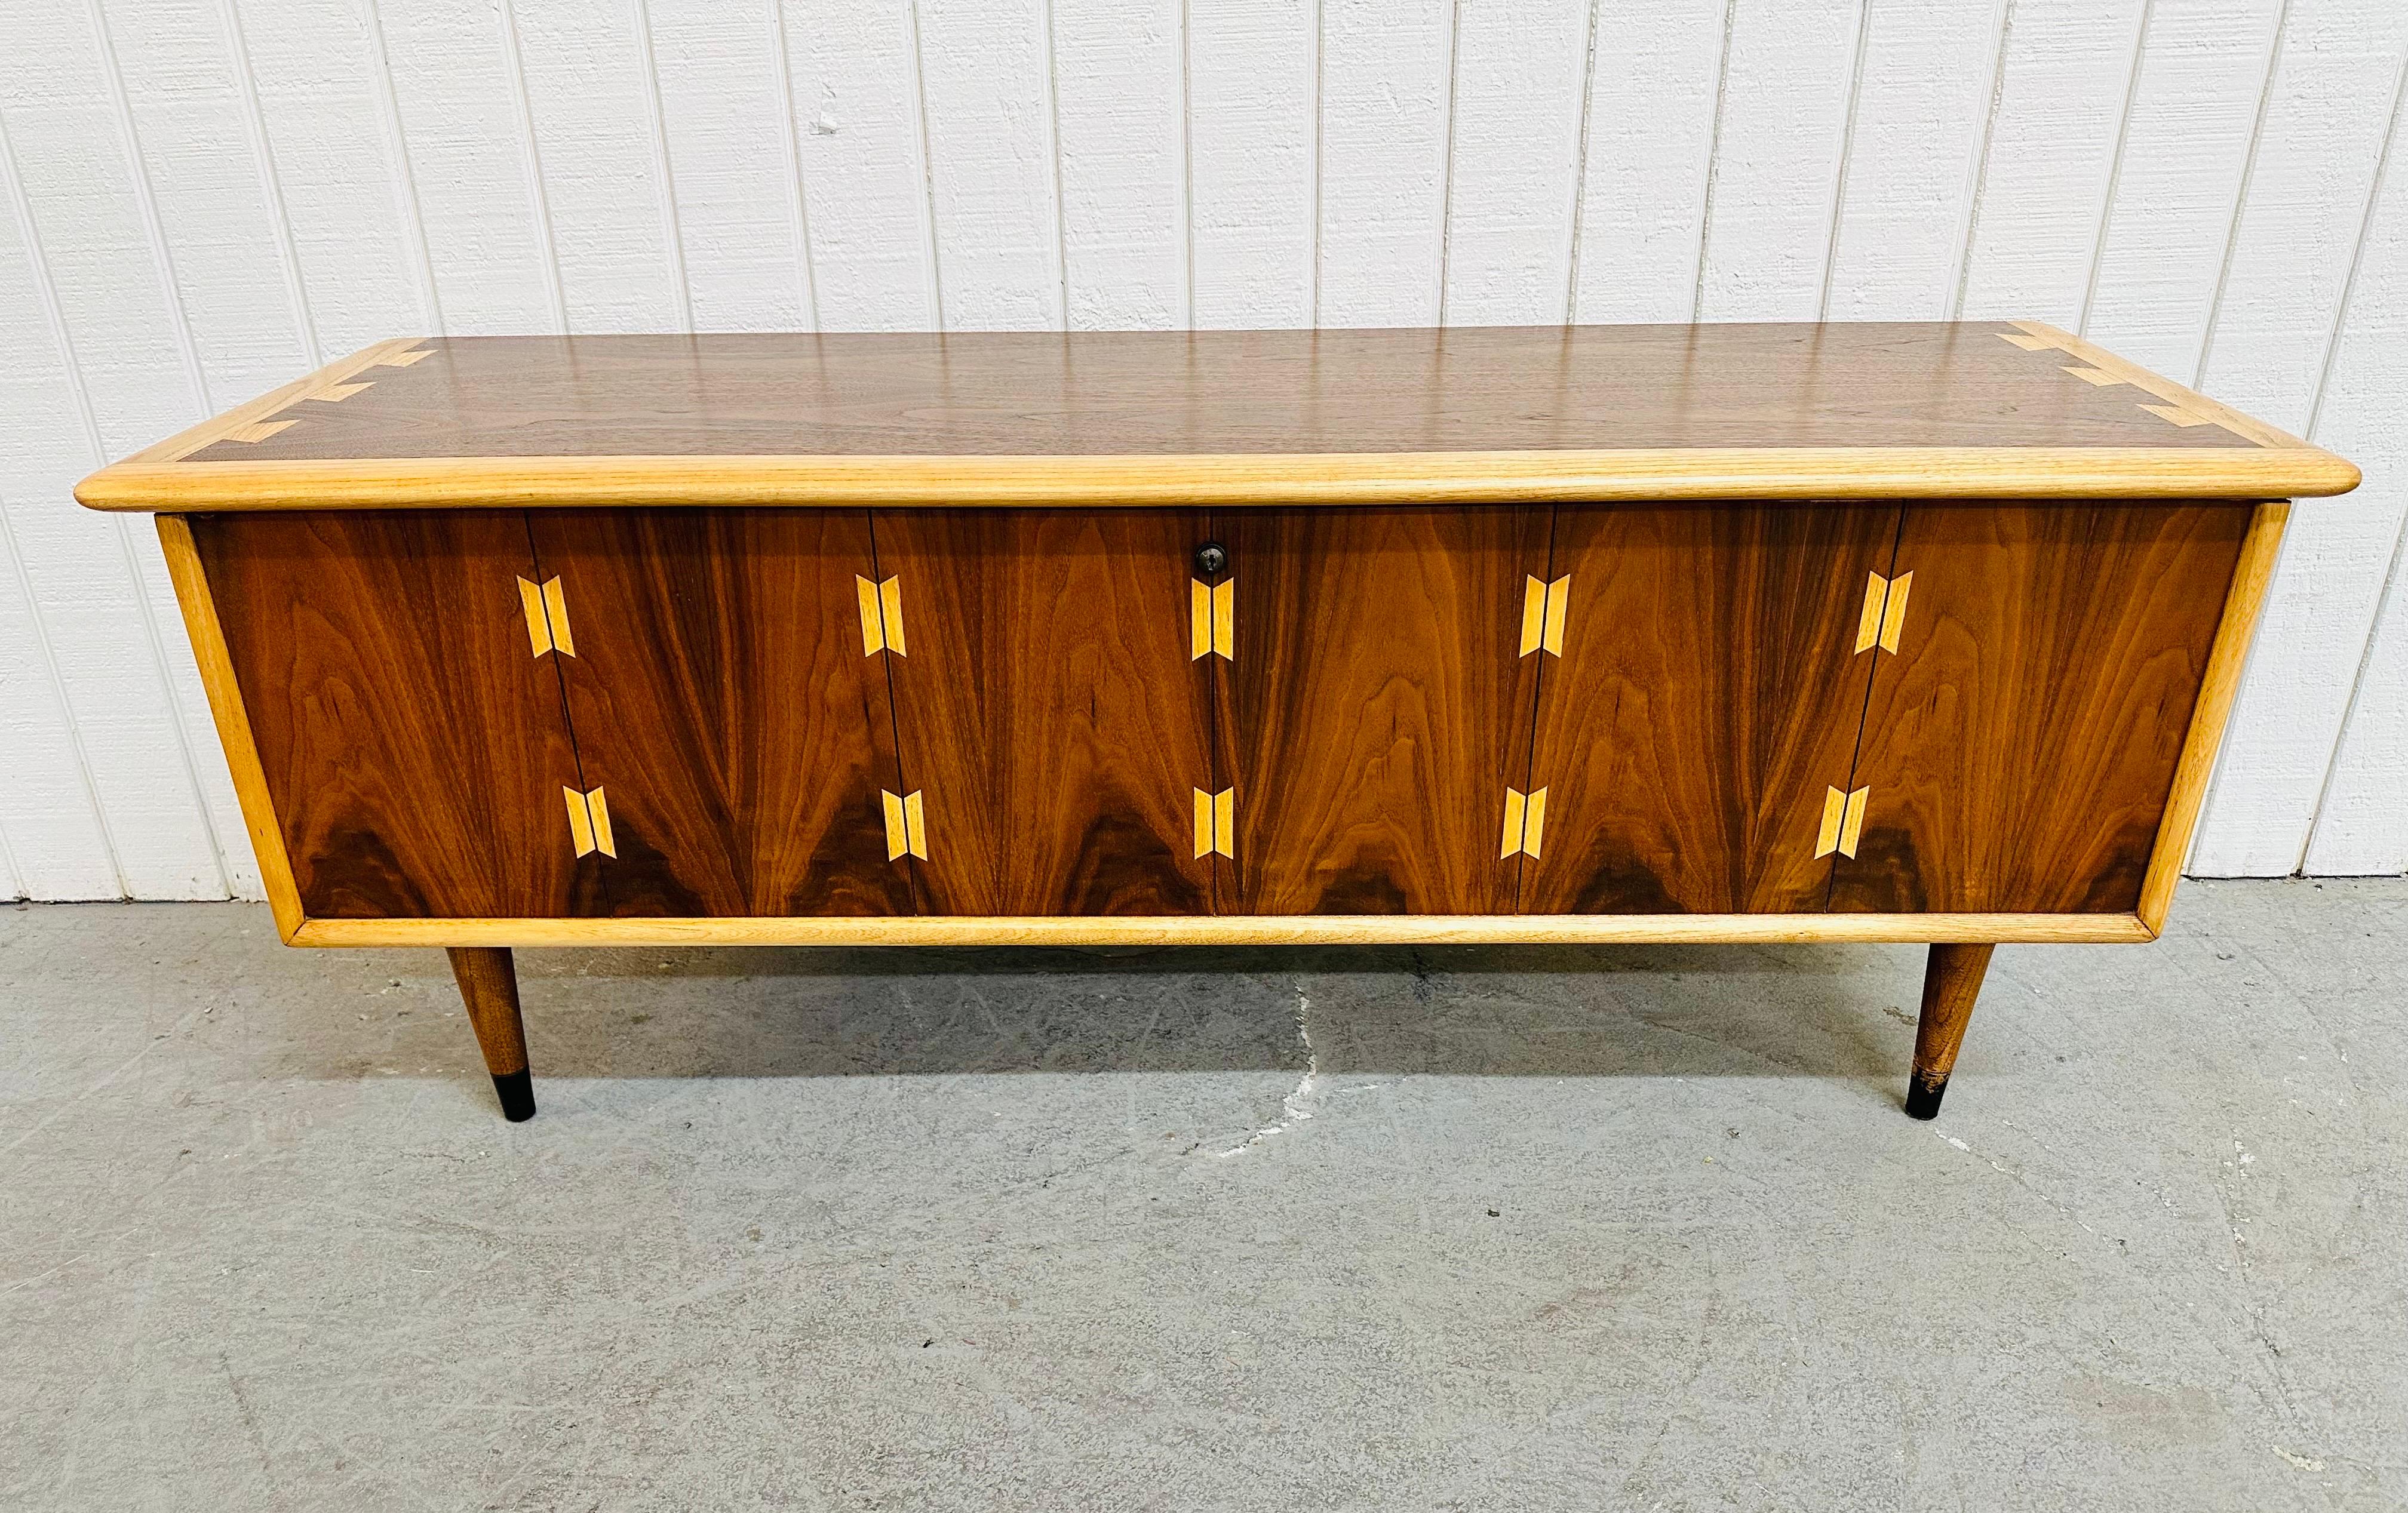 This listing is for a Mid-Century Modern Lane Acclaimed Walnut Cedar Chest. Featuring a straight line design, iconic Lane Acclaimed dove tailed top, original push button lock that opens up to a cedar lined storage area, modern legs with black tips,